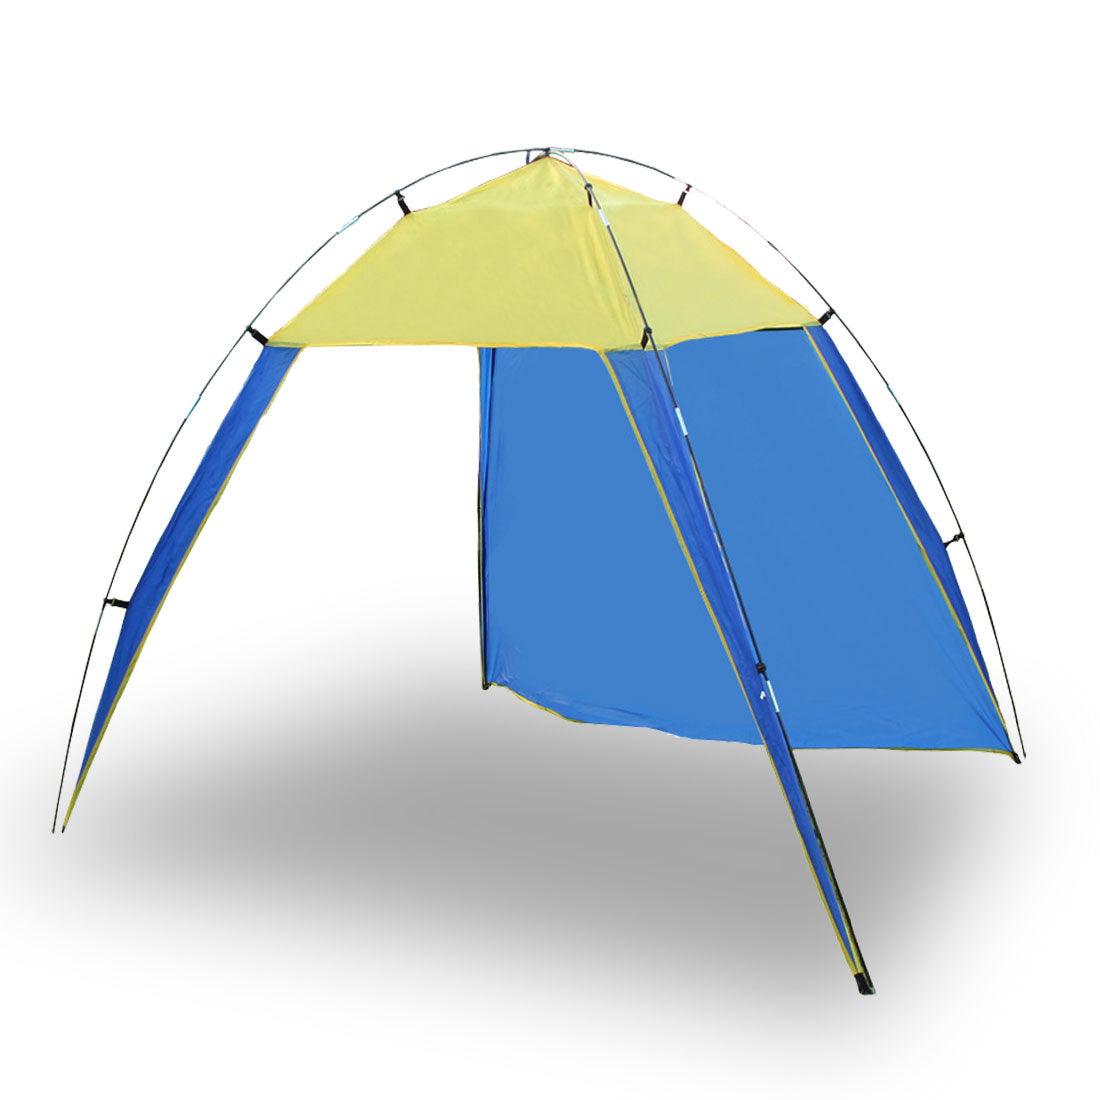 Portable Beach Tent Sun Shelter UV Shade Family Outdoor Camping Yard To 4 People - blue